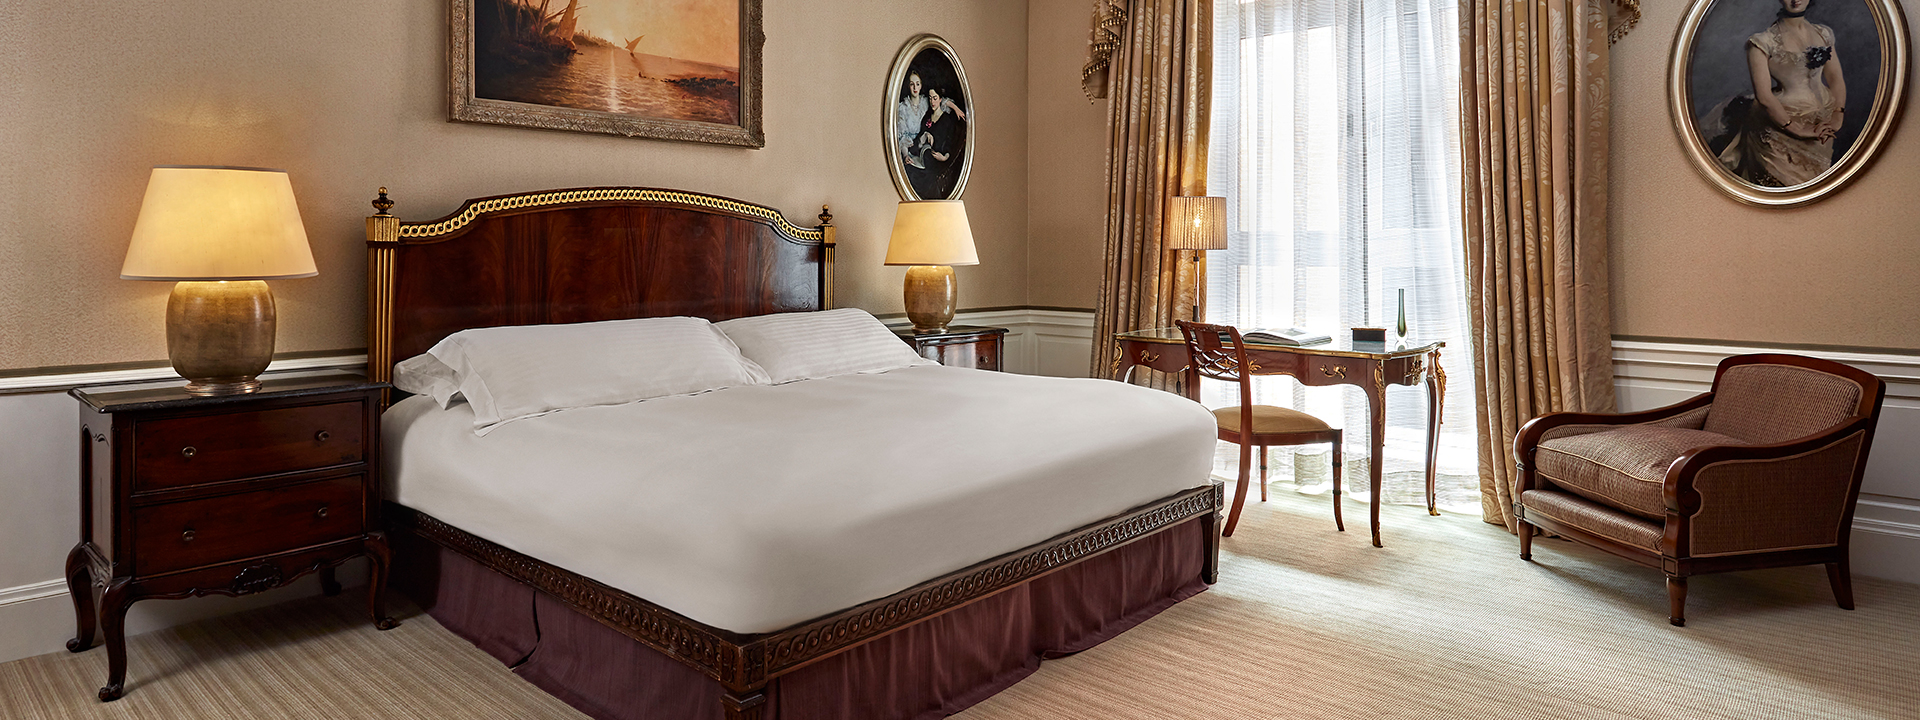 Comfortable and spacious bed at the Sutherland Suite.